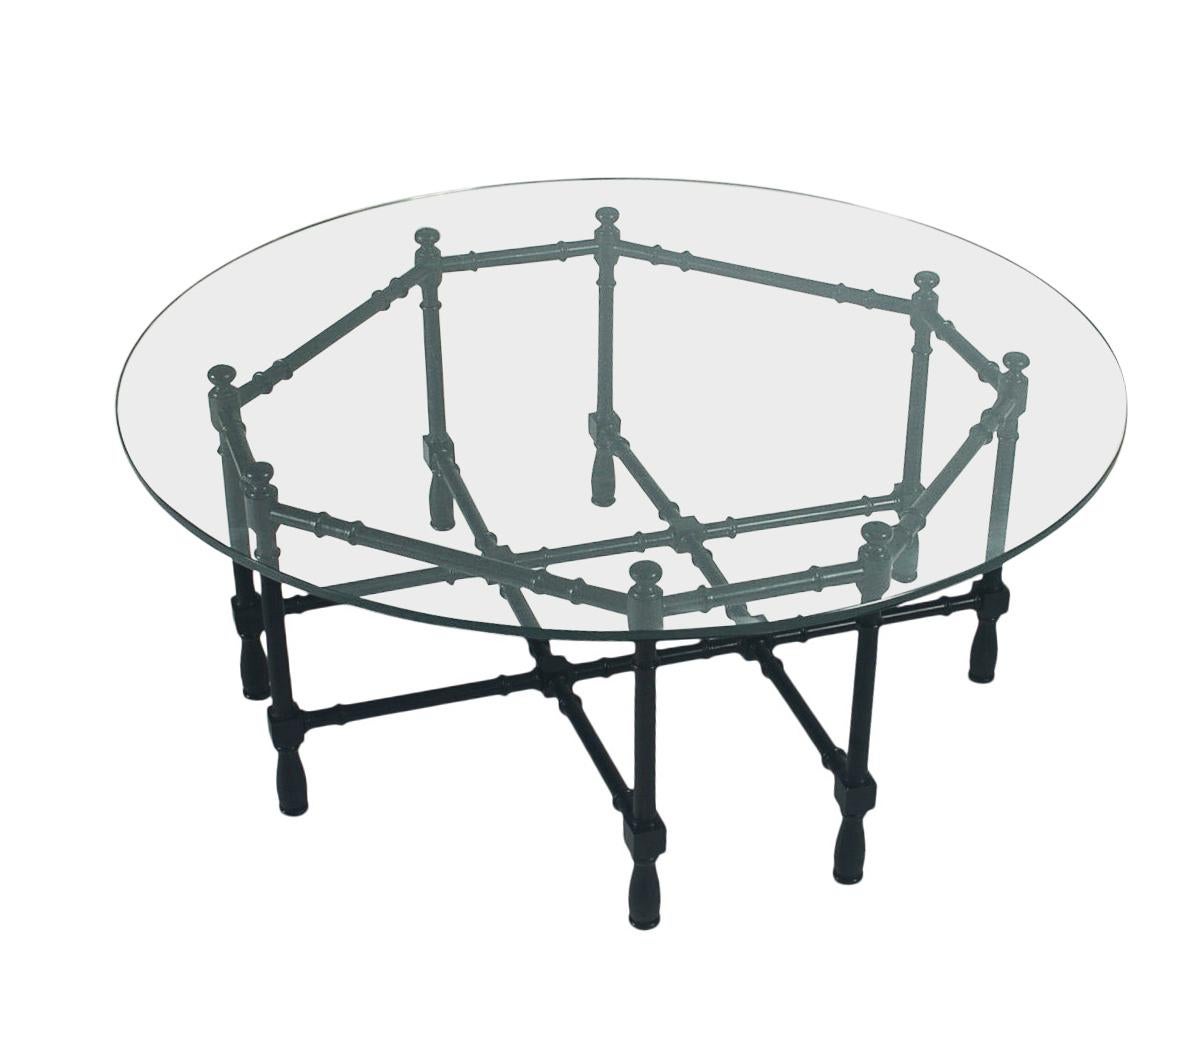 A circular glass coffee table circa 1970's. Its features a black lacquered faux bamboo base with thick glass circular top.